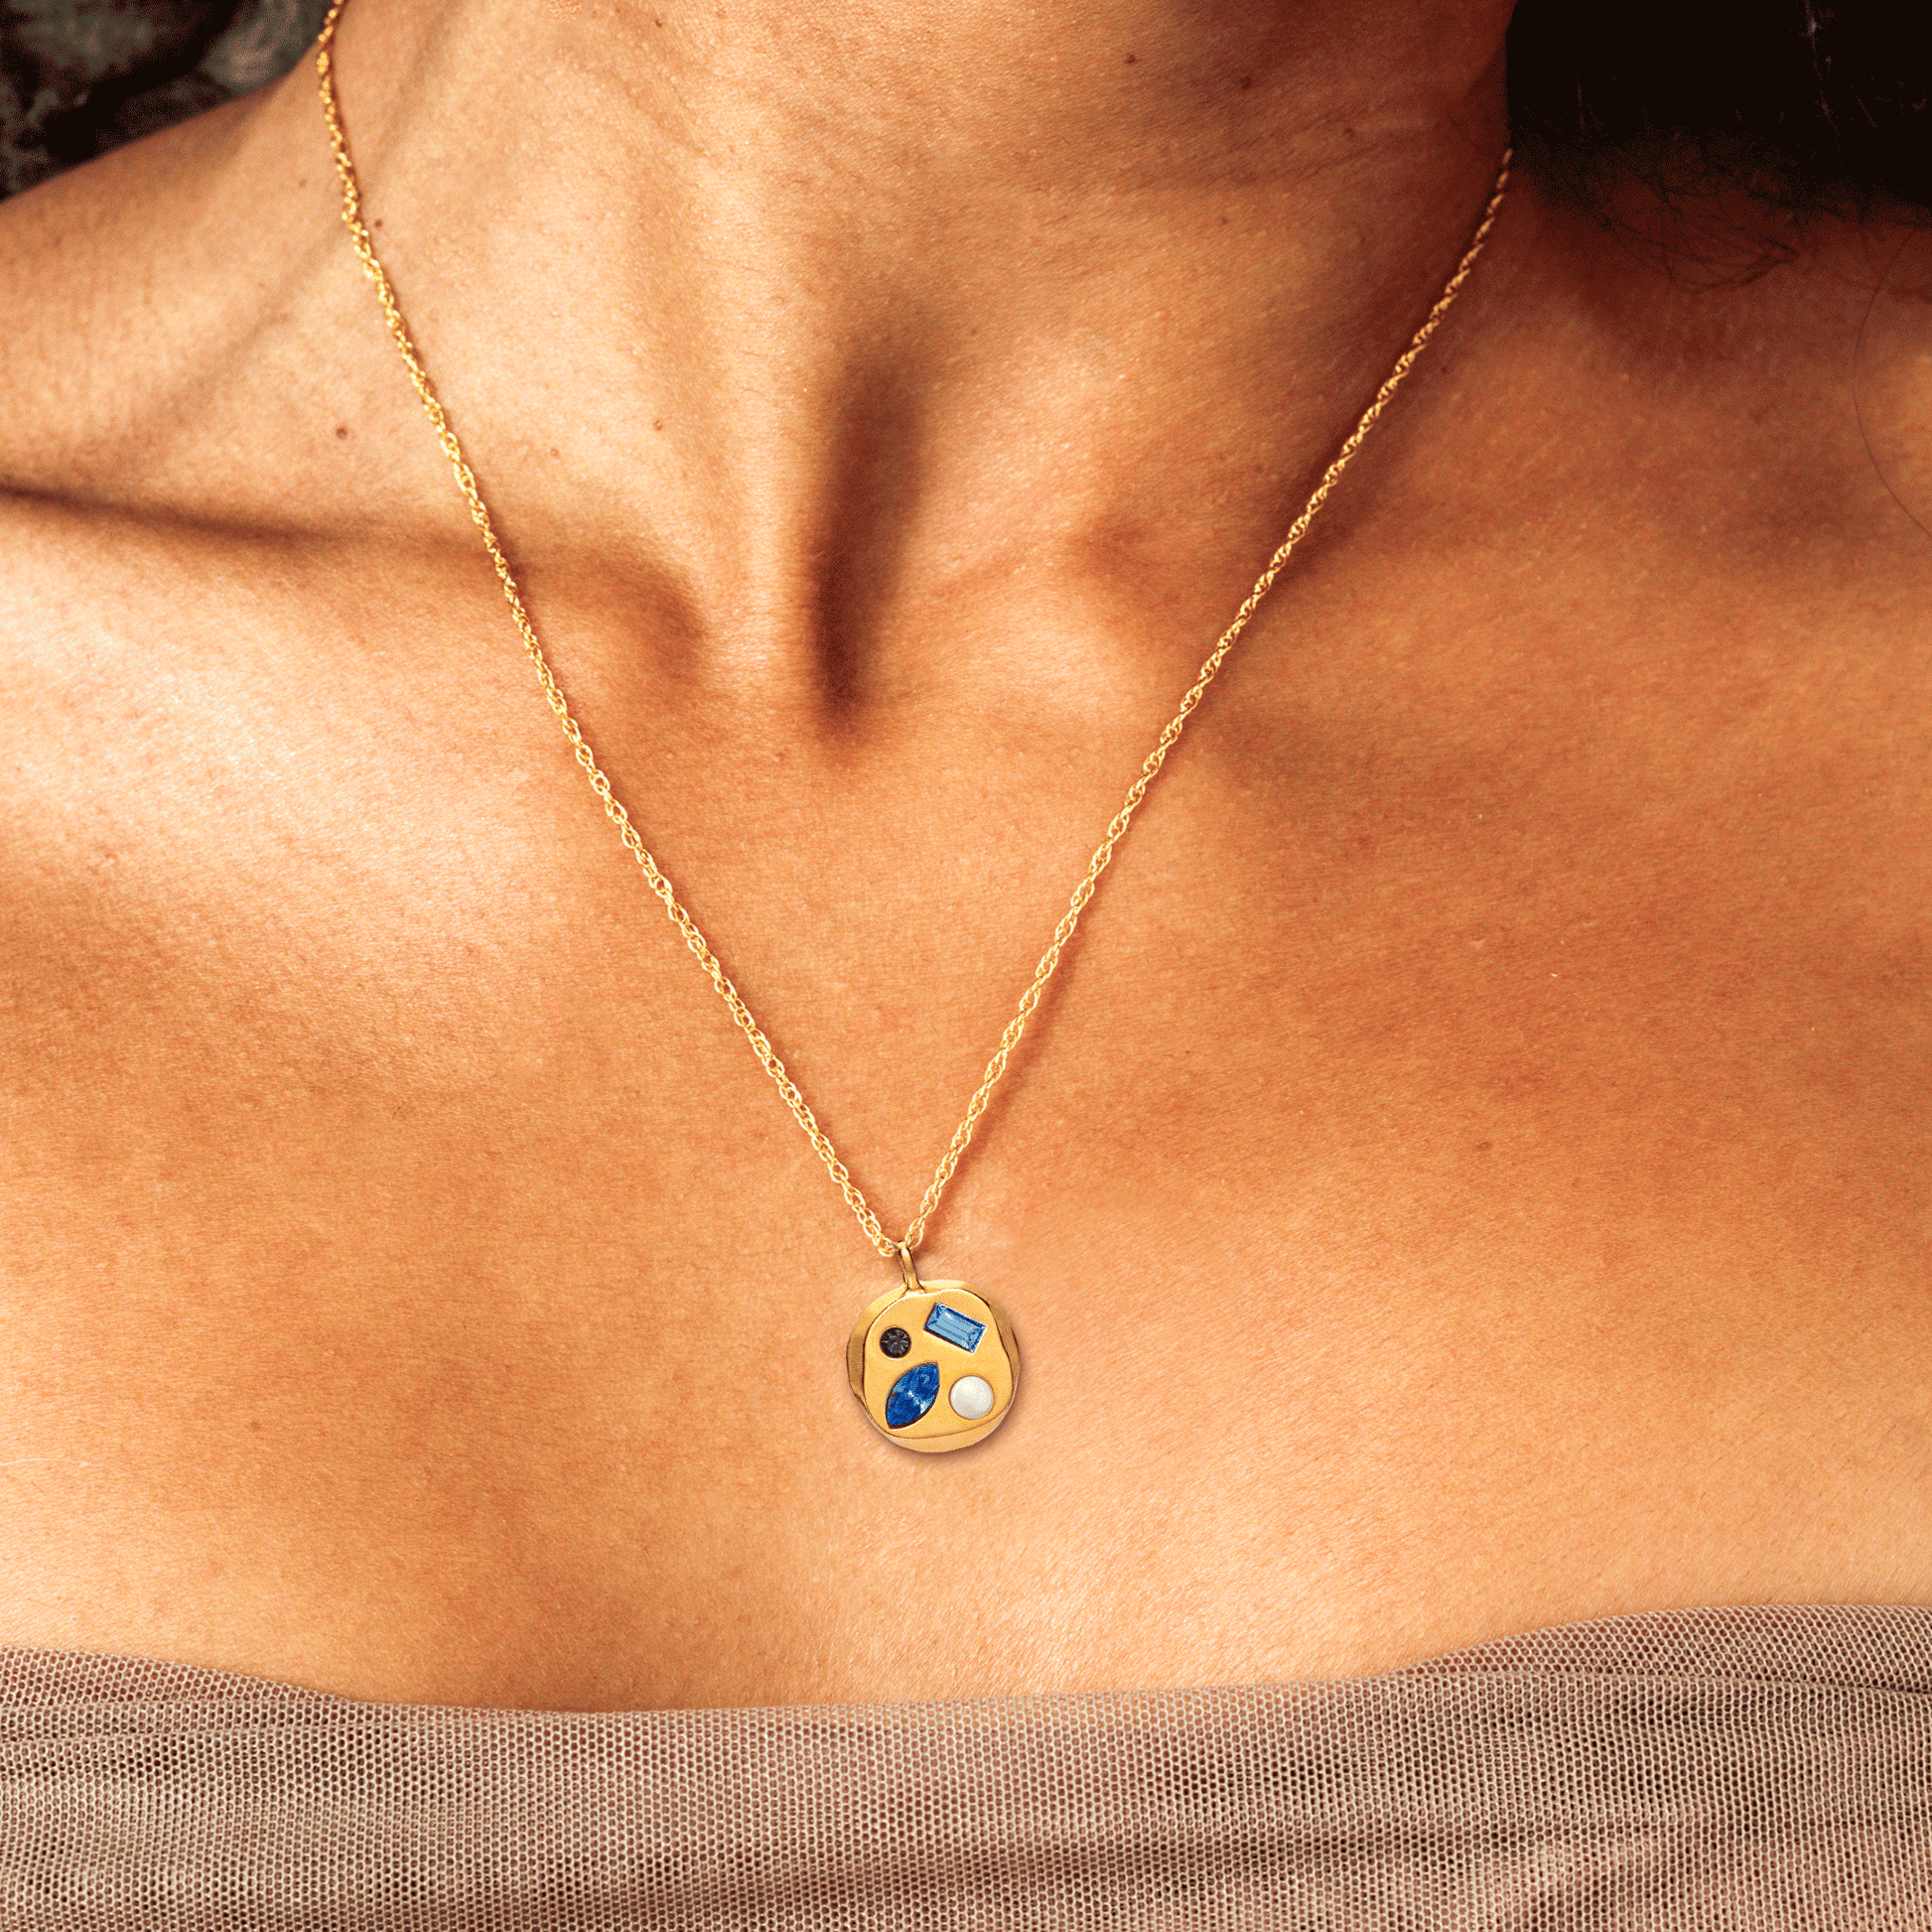 Person wearing The September Thirtieth Pendant